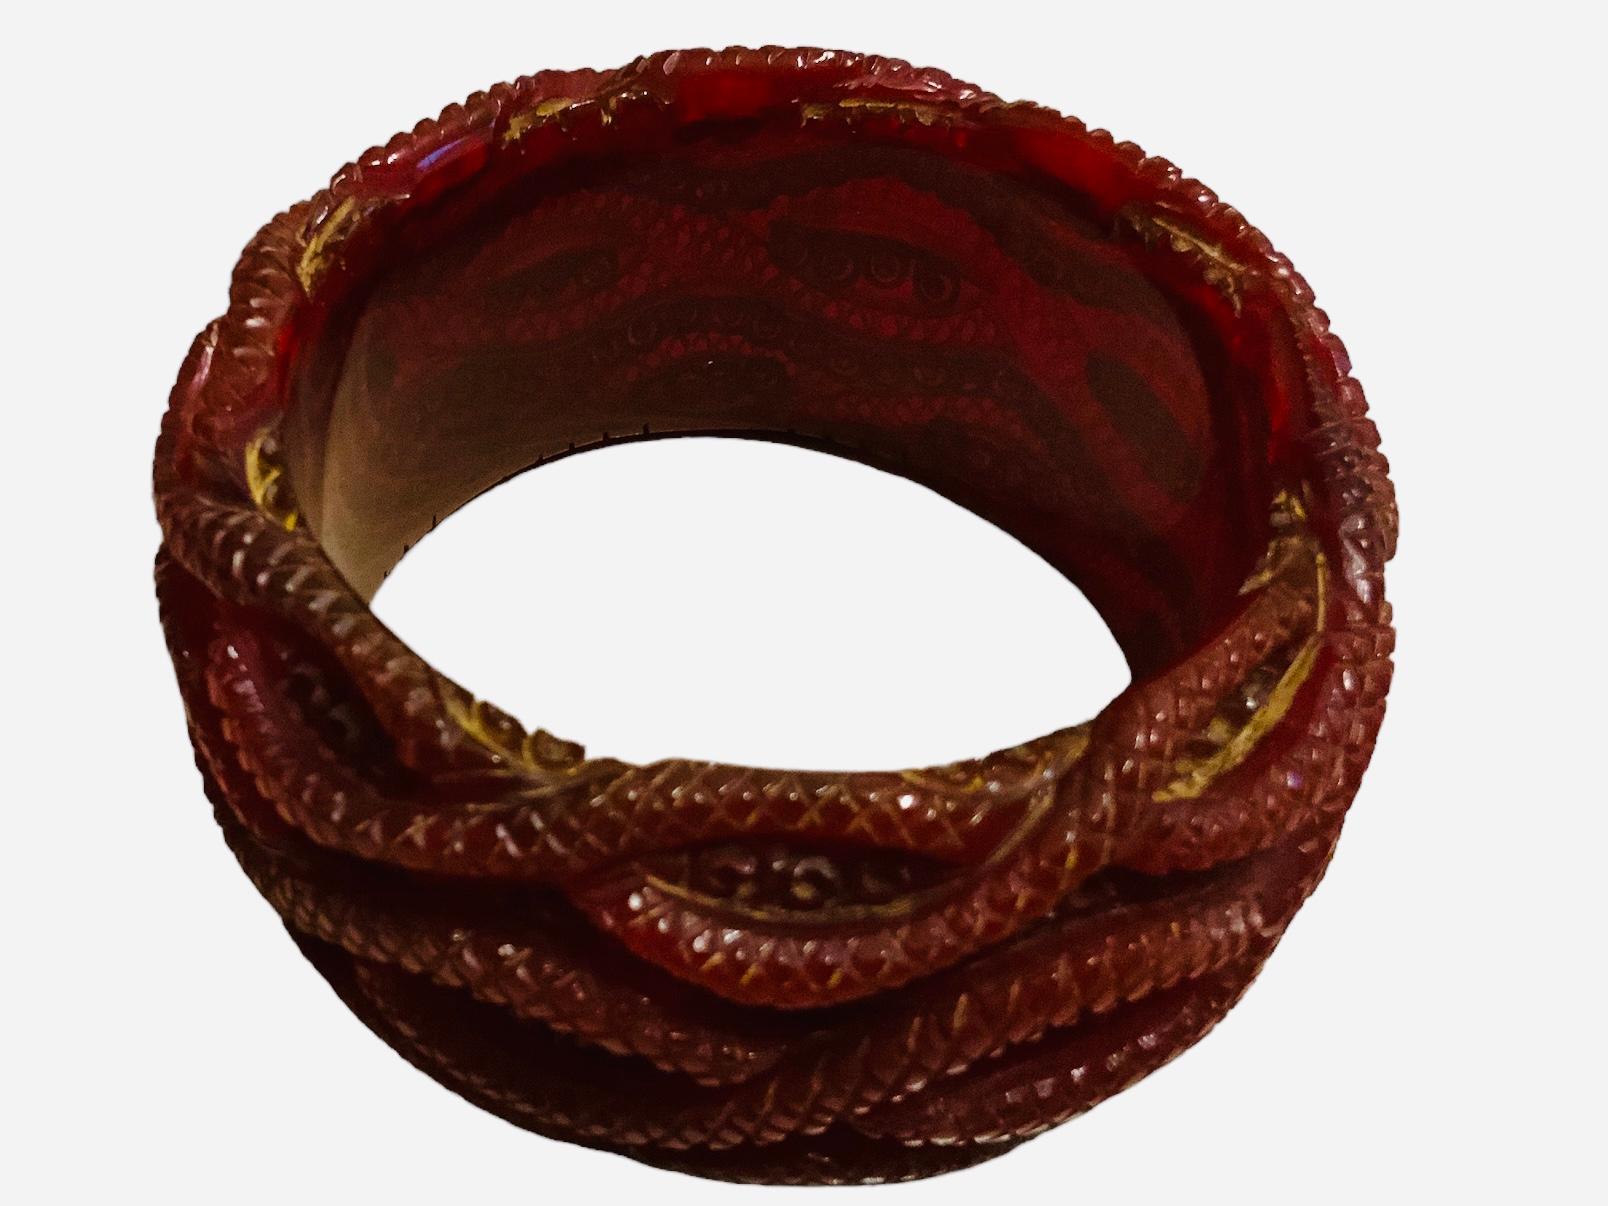 This is a red color carved Bakelite bangle. It depicts a wide bangle that is adorned with a cluster of overlapping snakes like. The “ snakes” are carved with diamonds and rings shaped patterns.